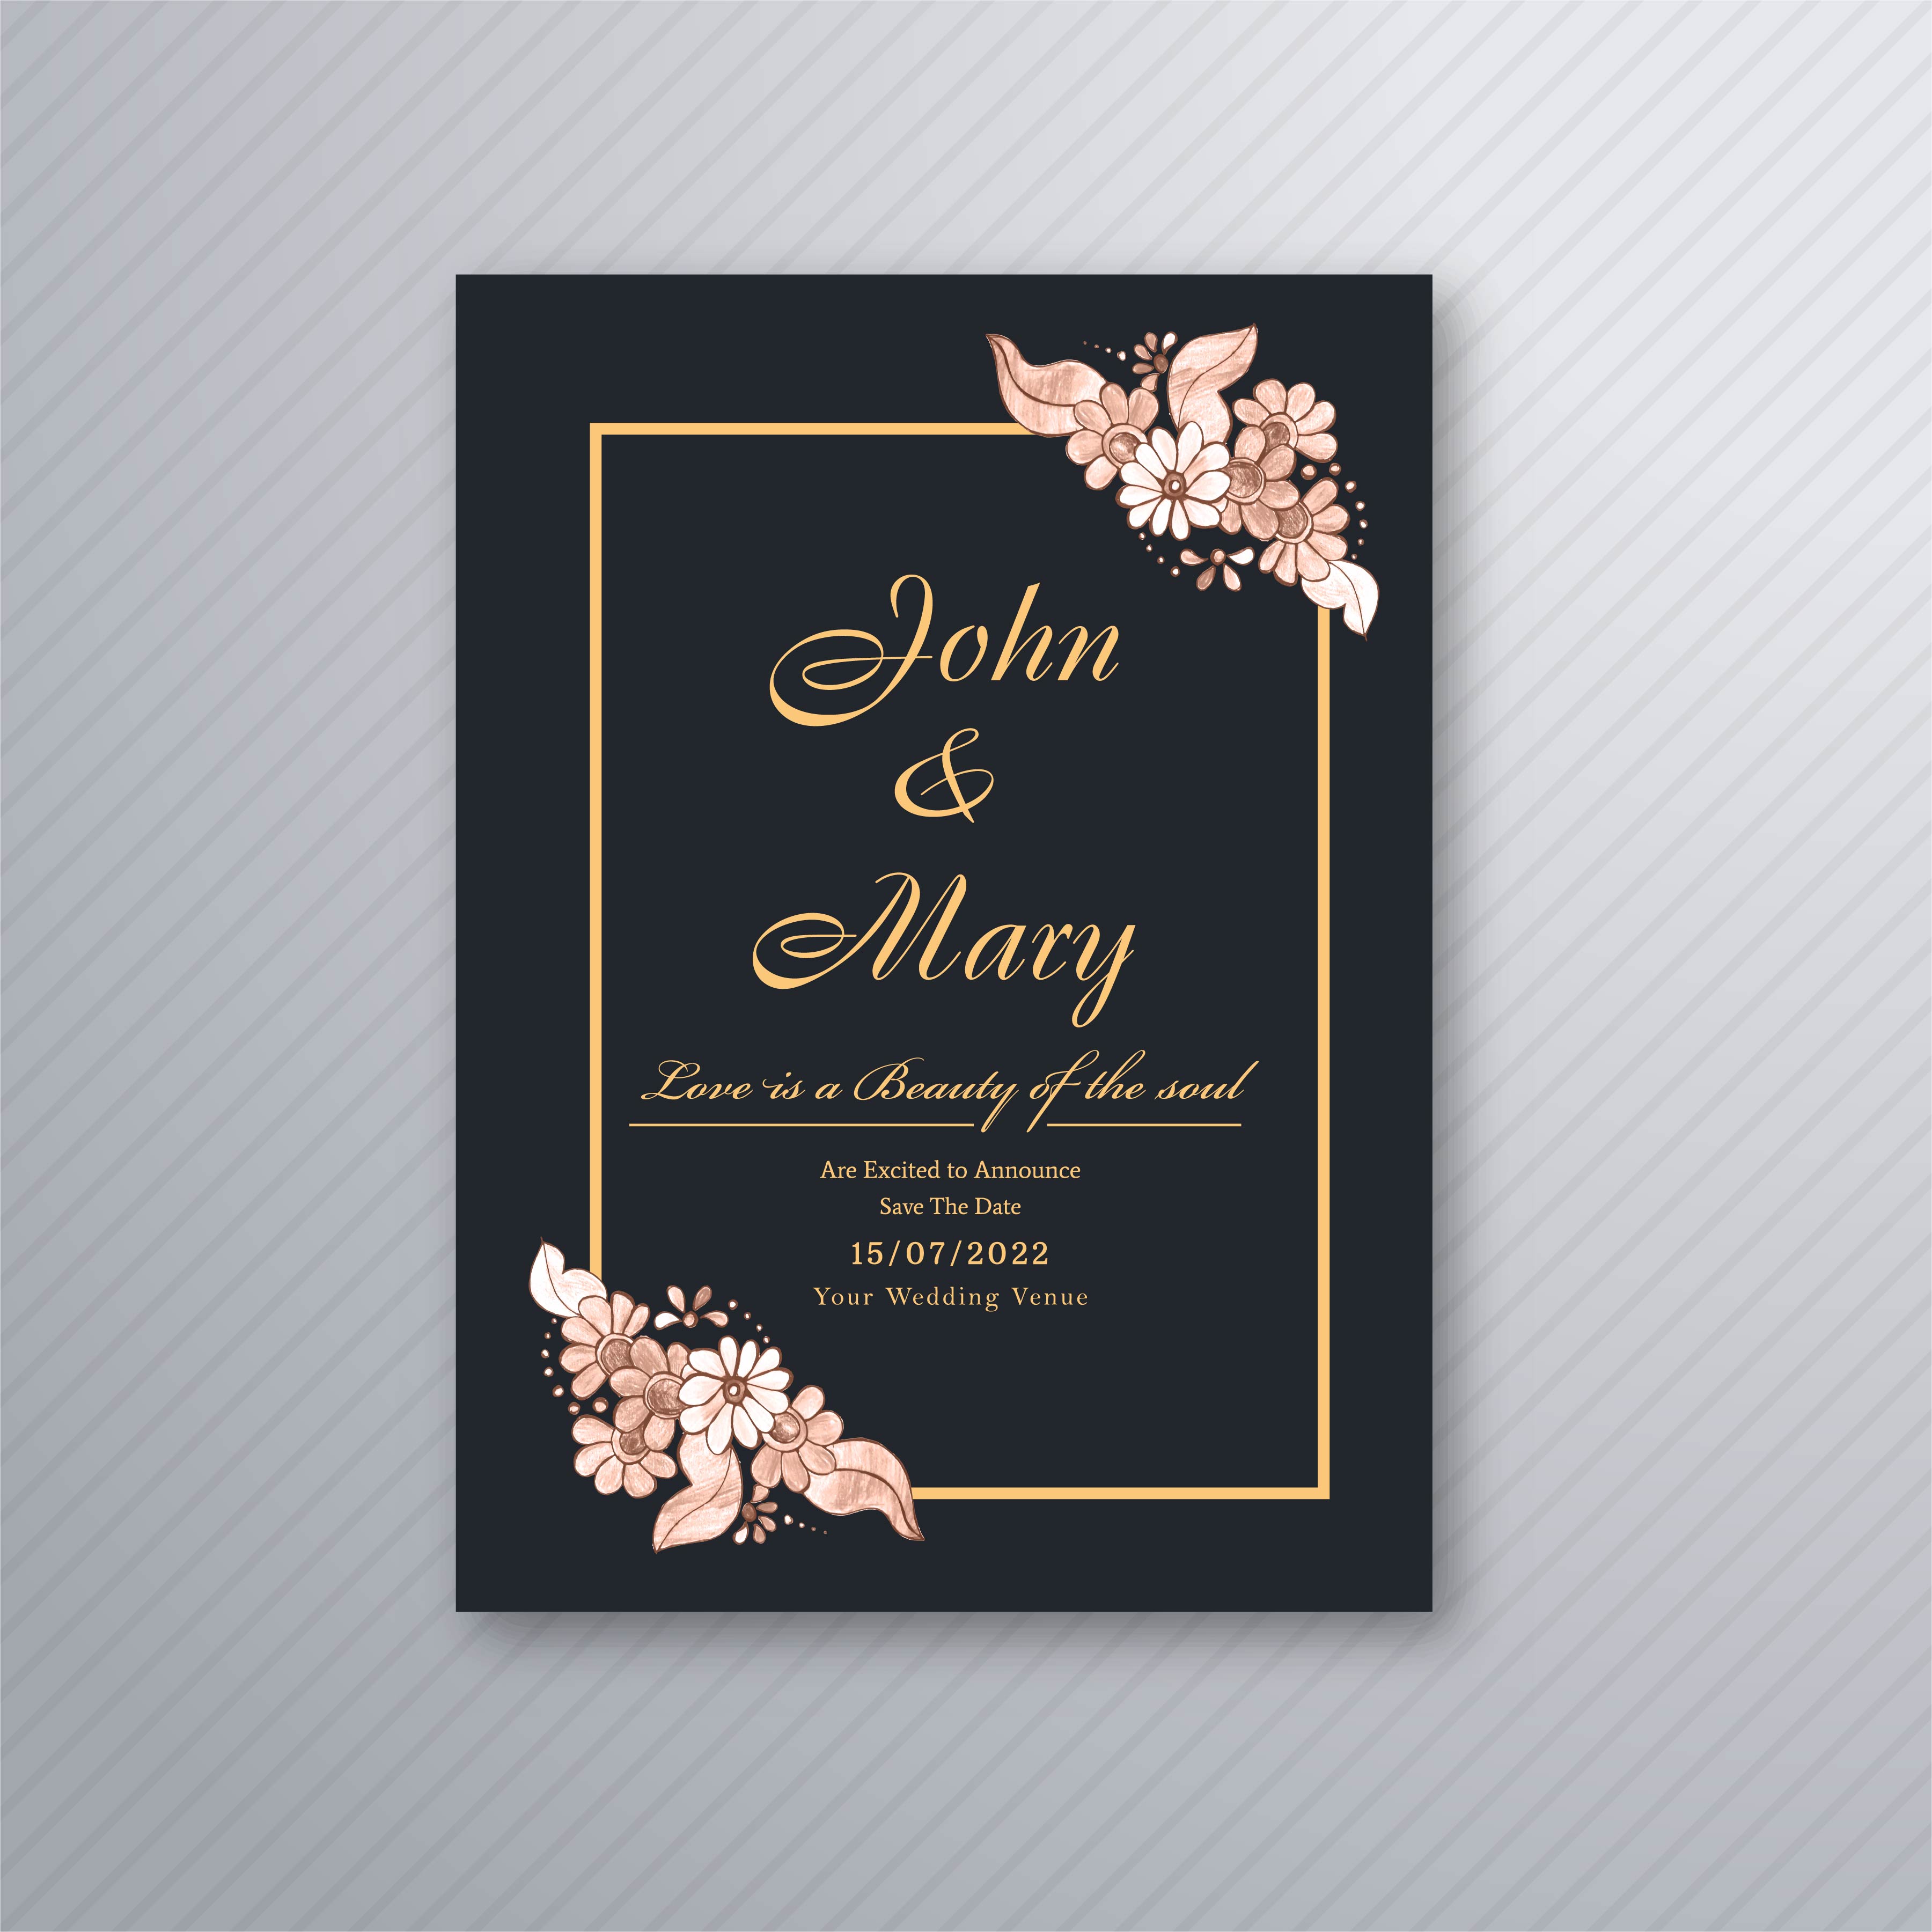 invitation card design vector art, icons, and graphics for free